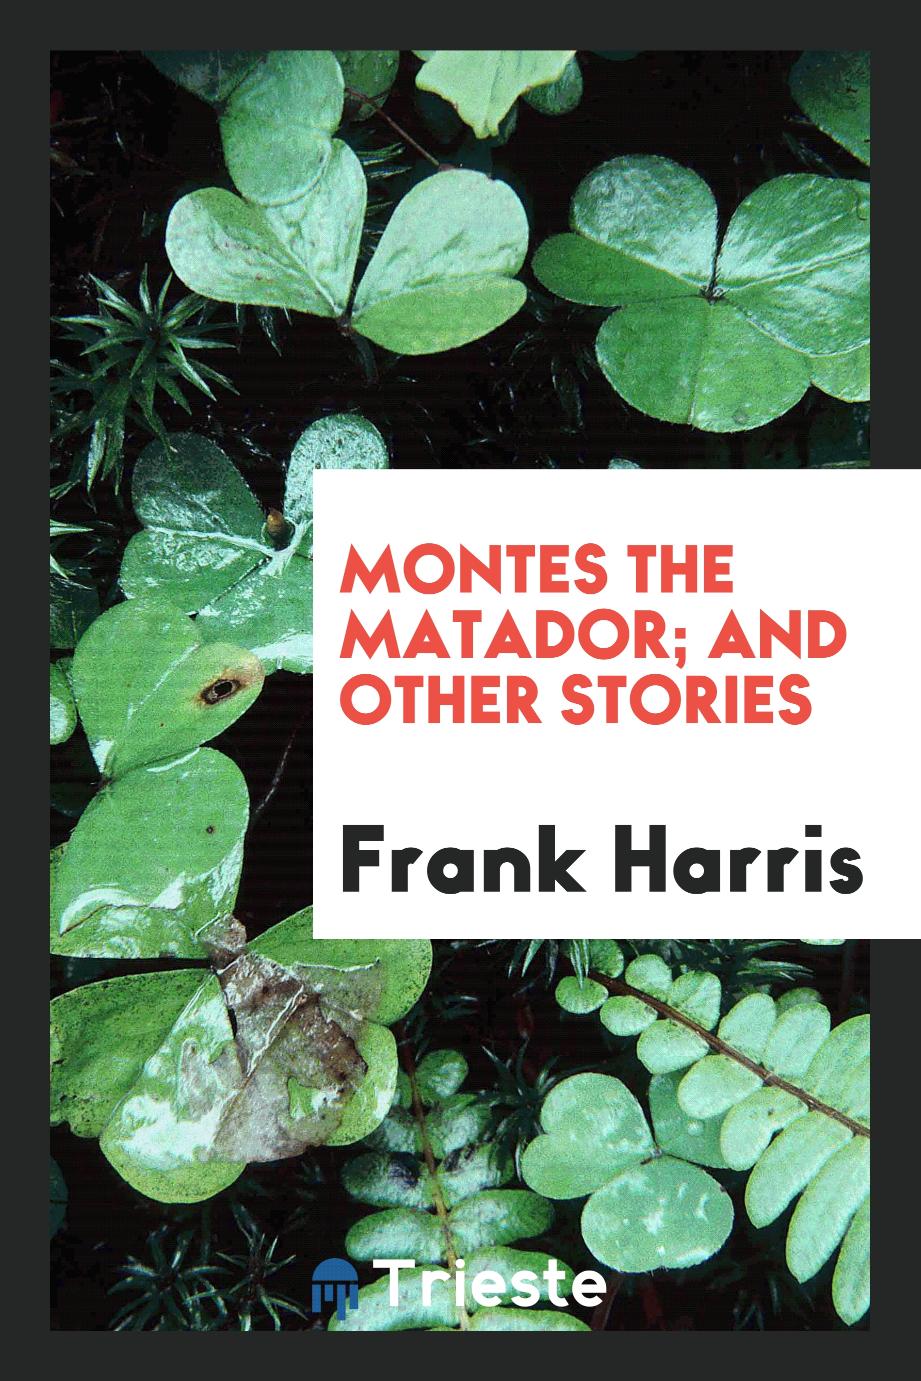 Montes the matador; And other stories